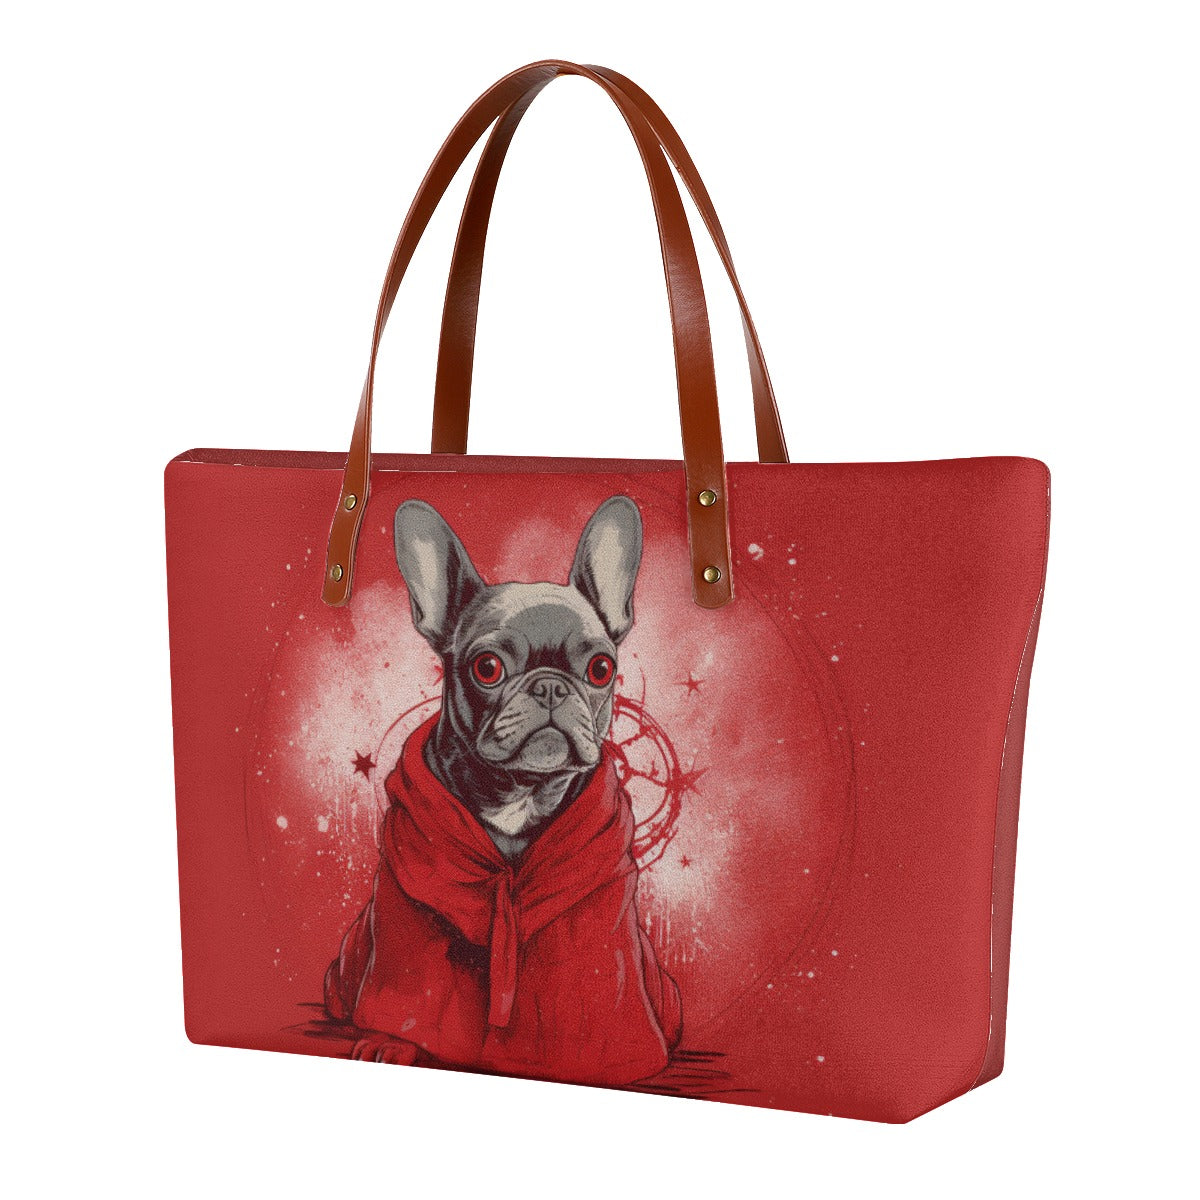 Women's Frenchie Tote Bag - Mystical Canine Accessory